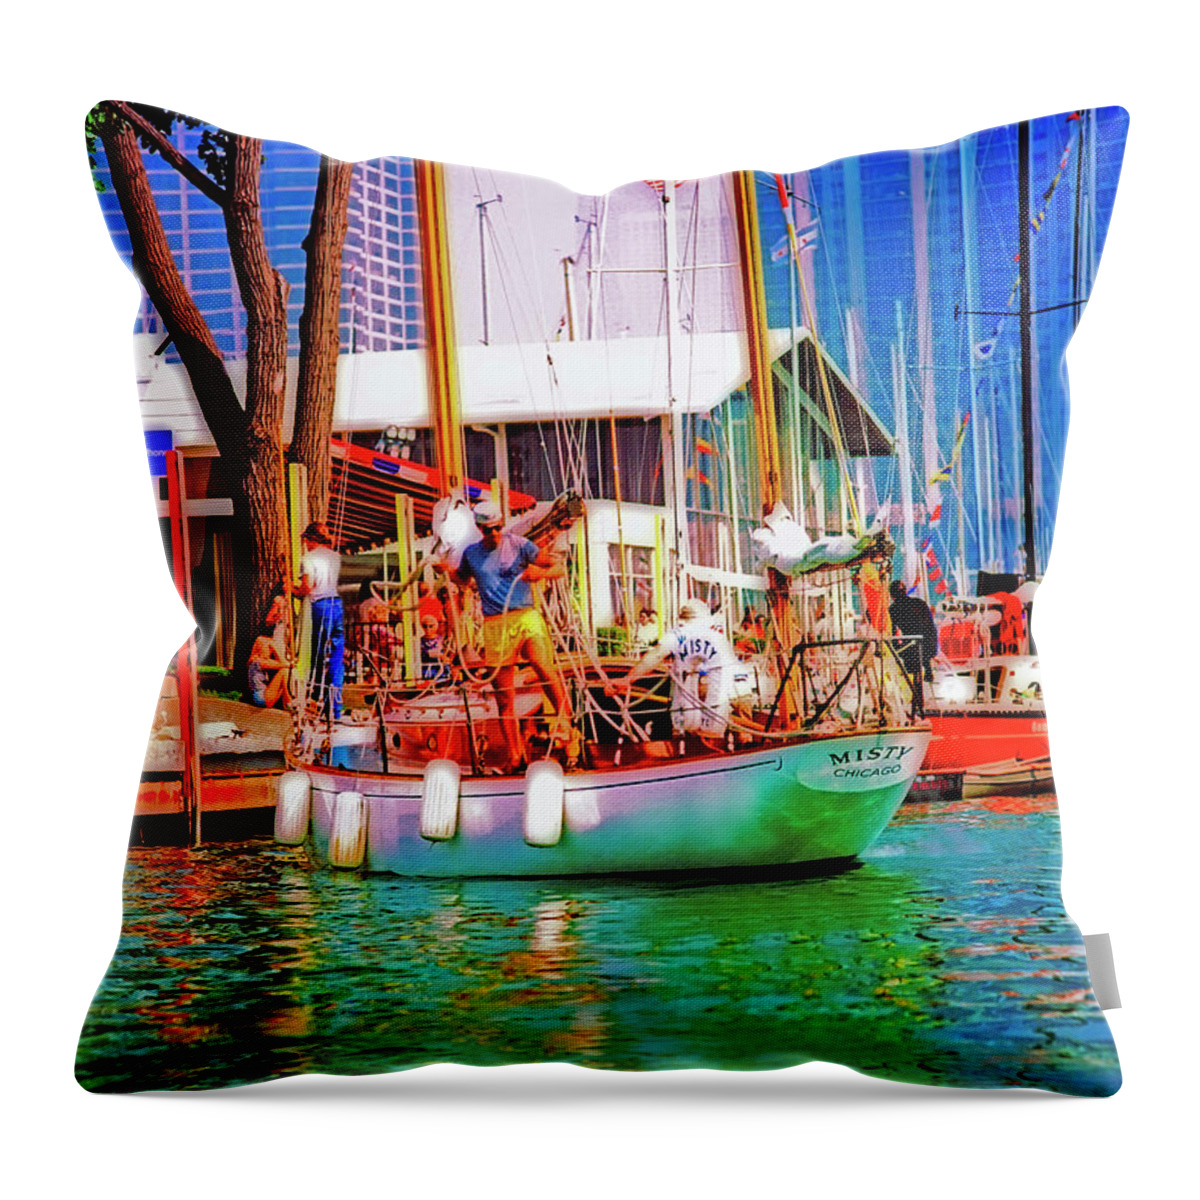 Misty Throw Pillow featuring the photograph Misty Chicago Chicago Yacht Club by Tom Jelen